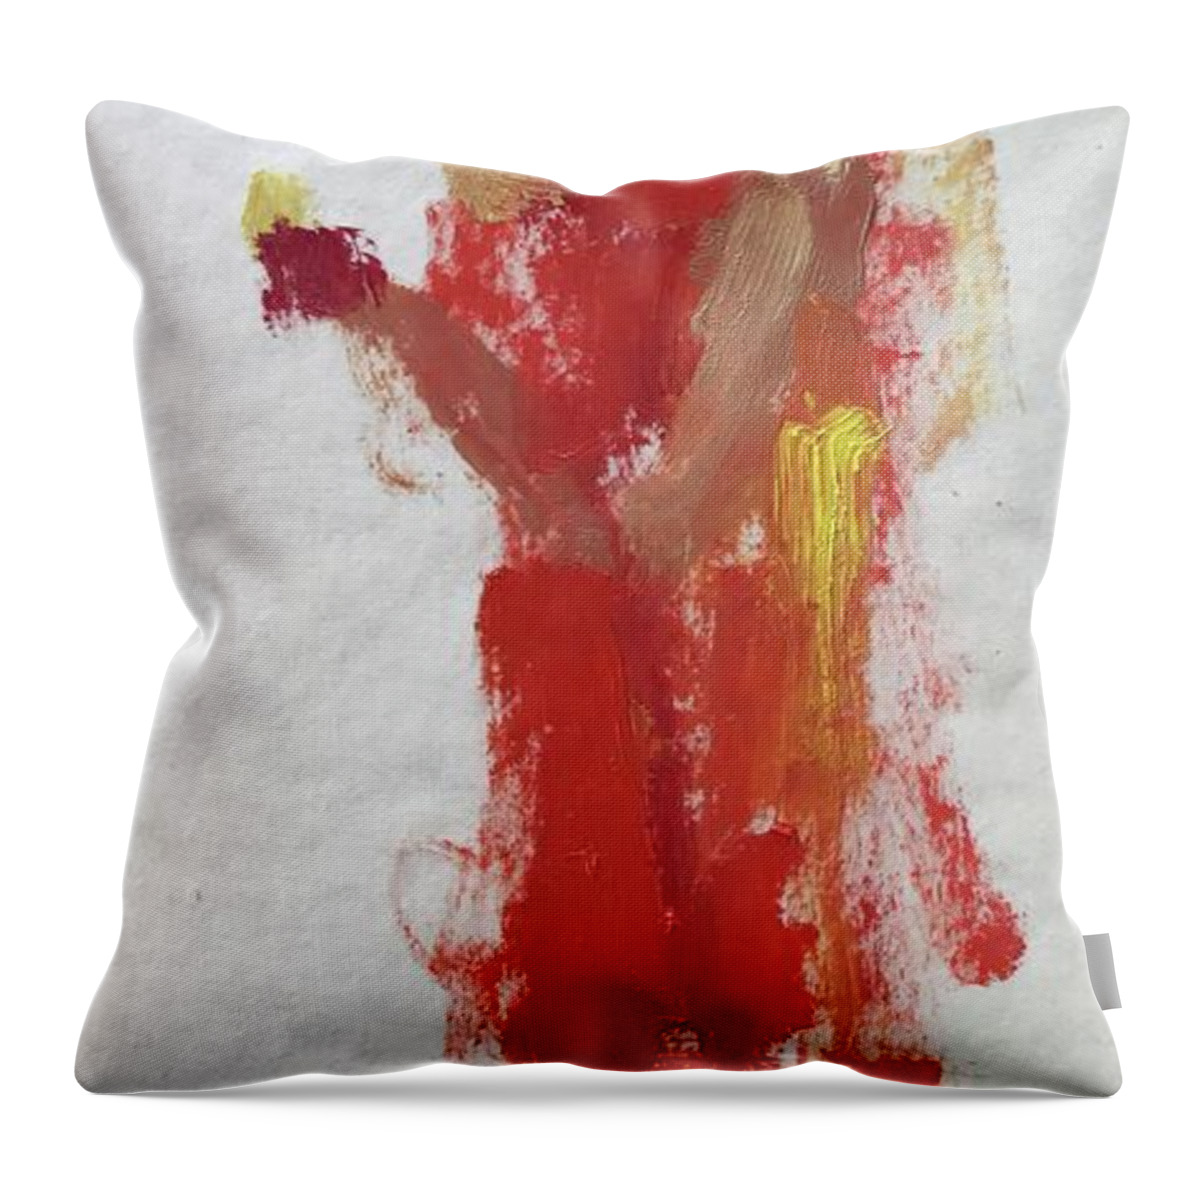  Throw Pillow featuring the painting Guest 28 by Carol Berning